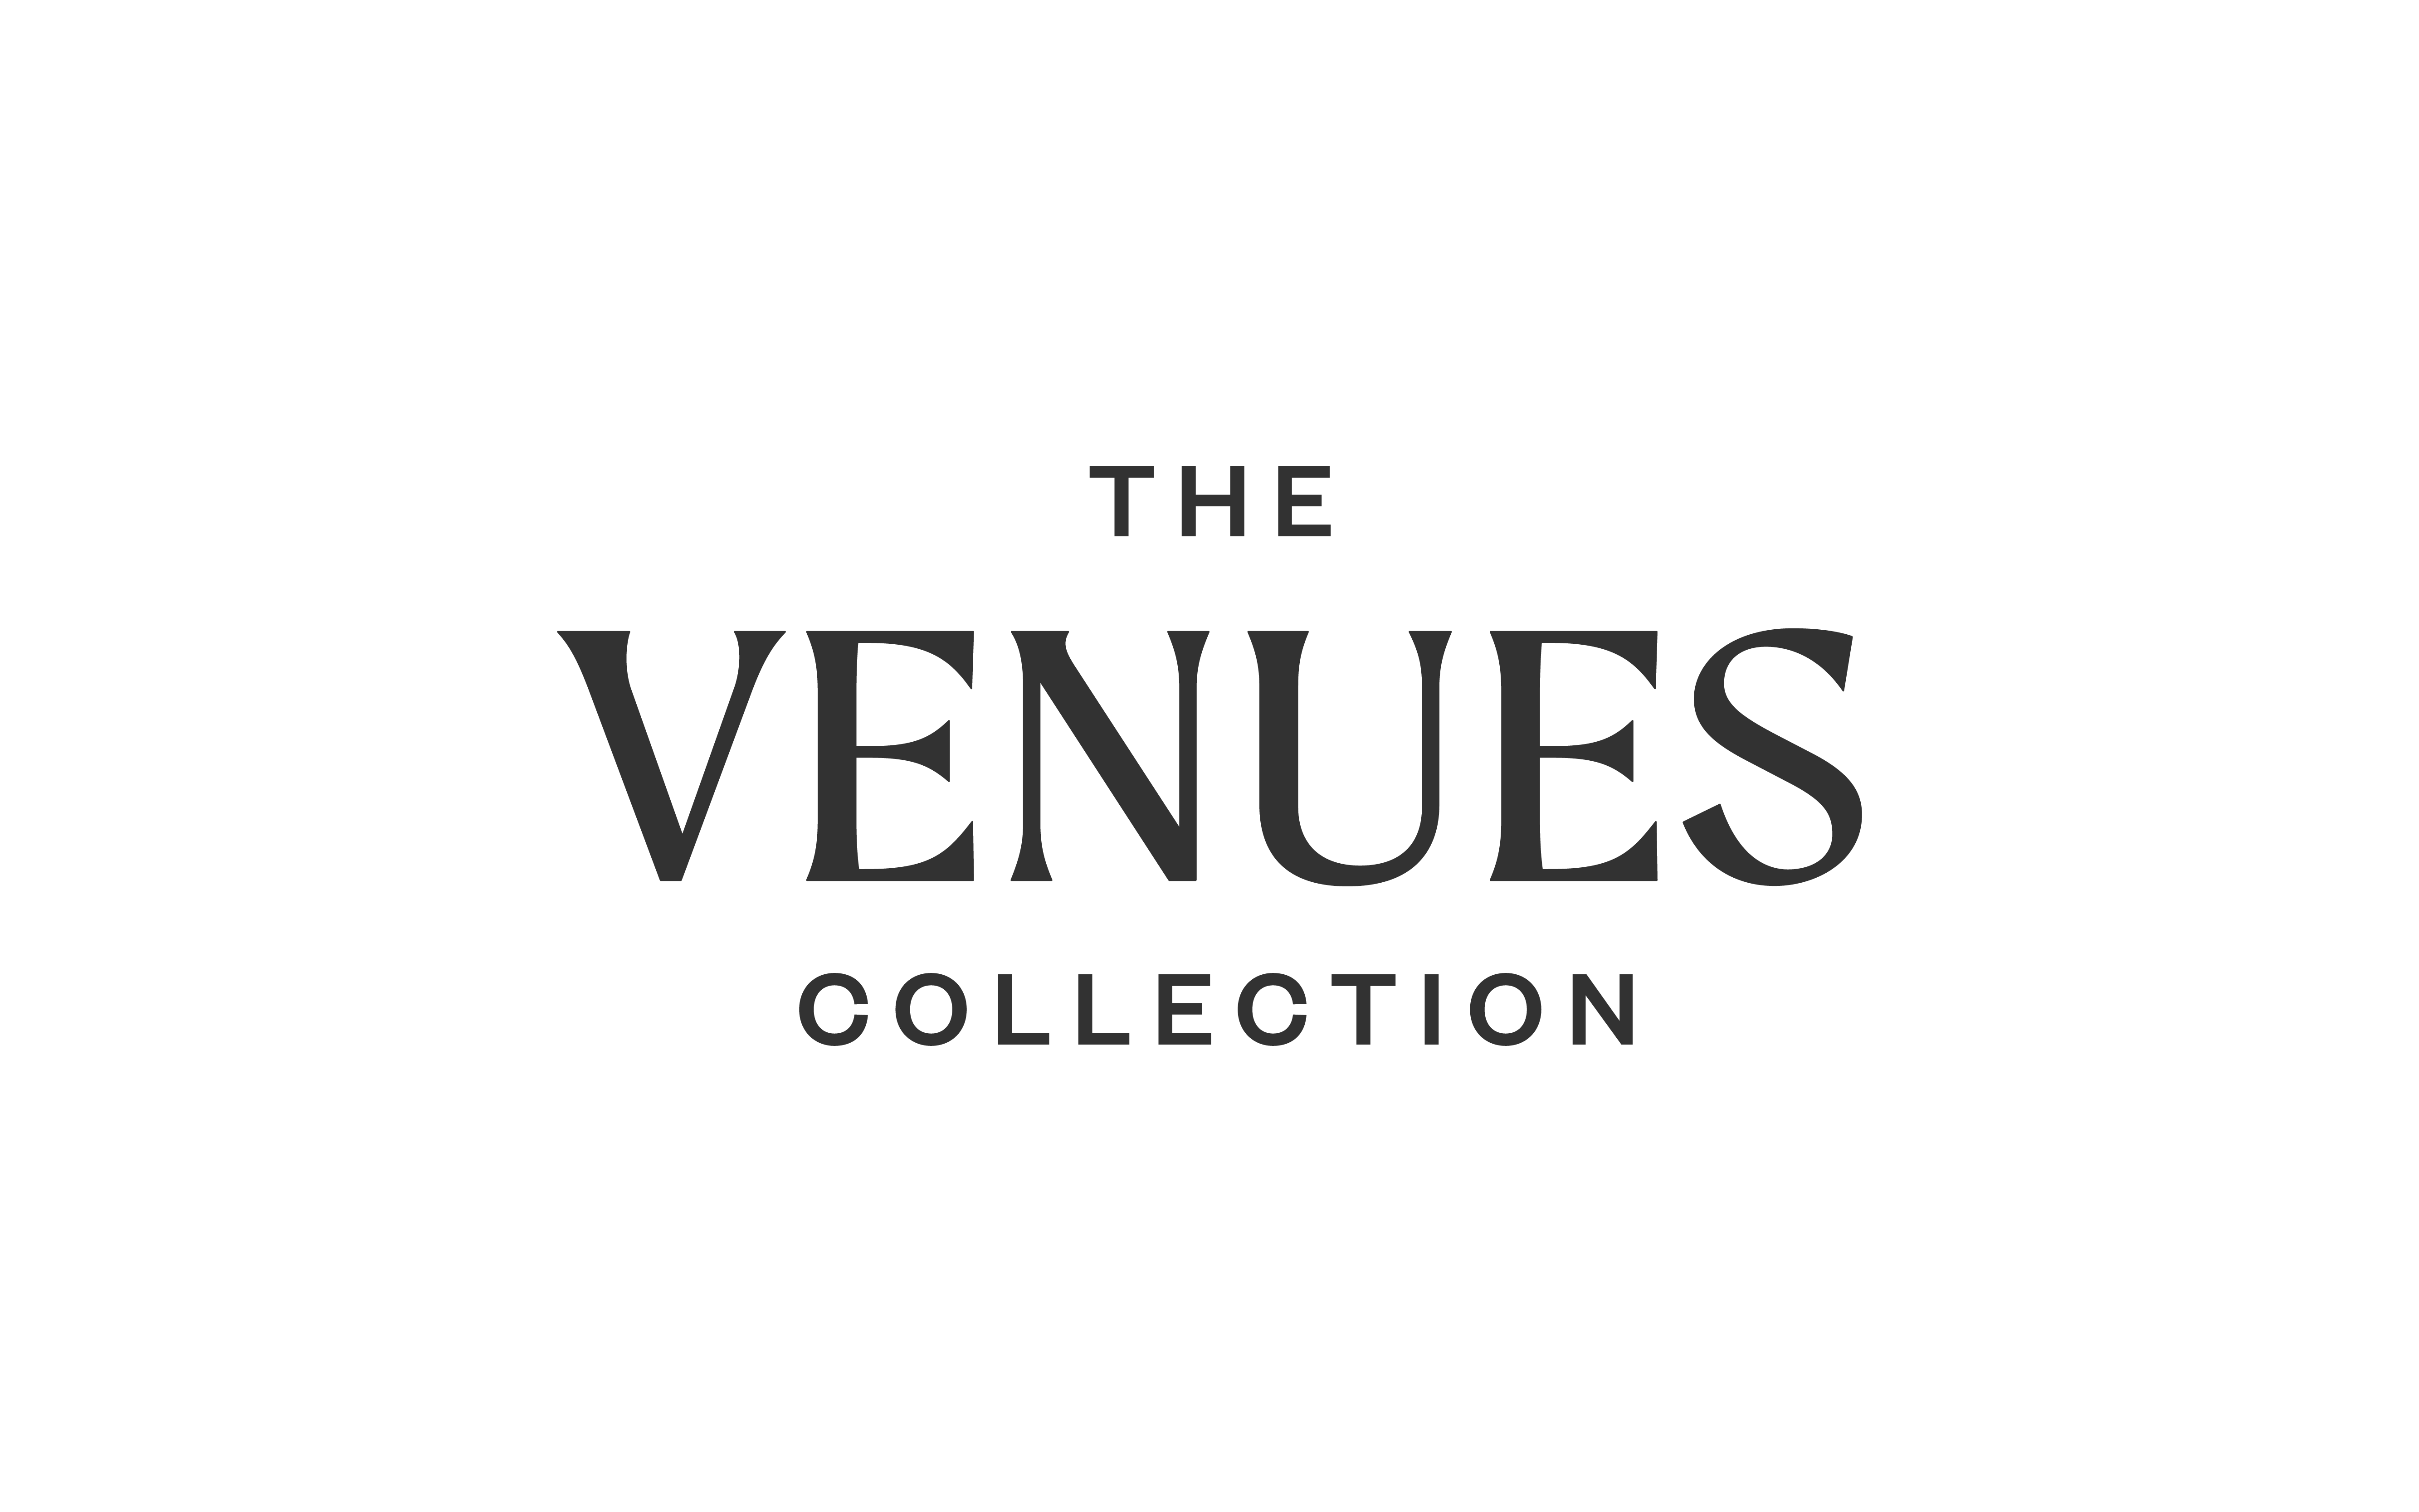 The Venues Collection logo